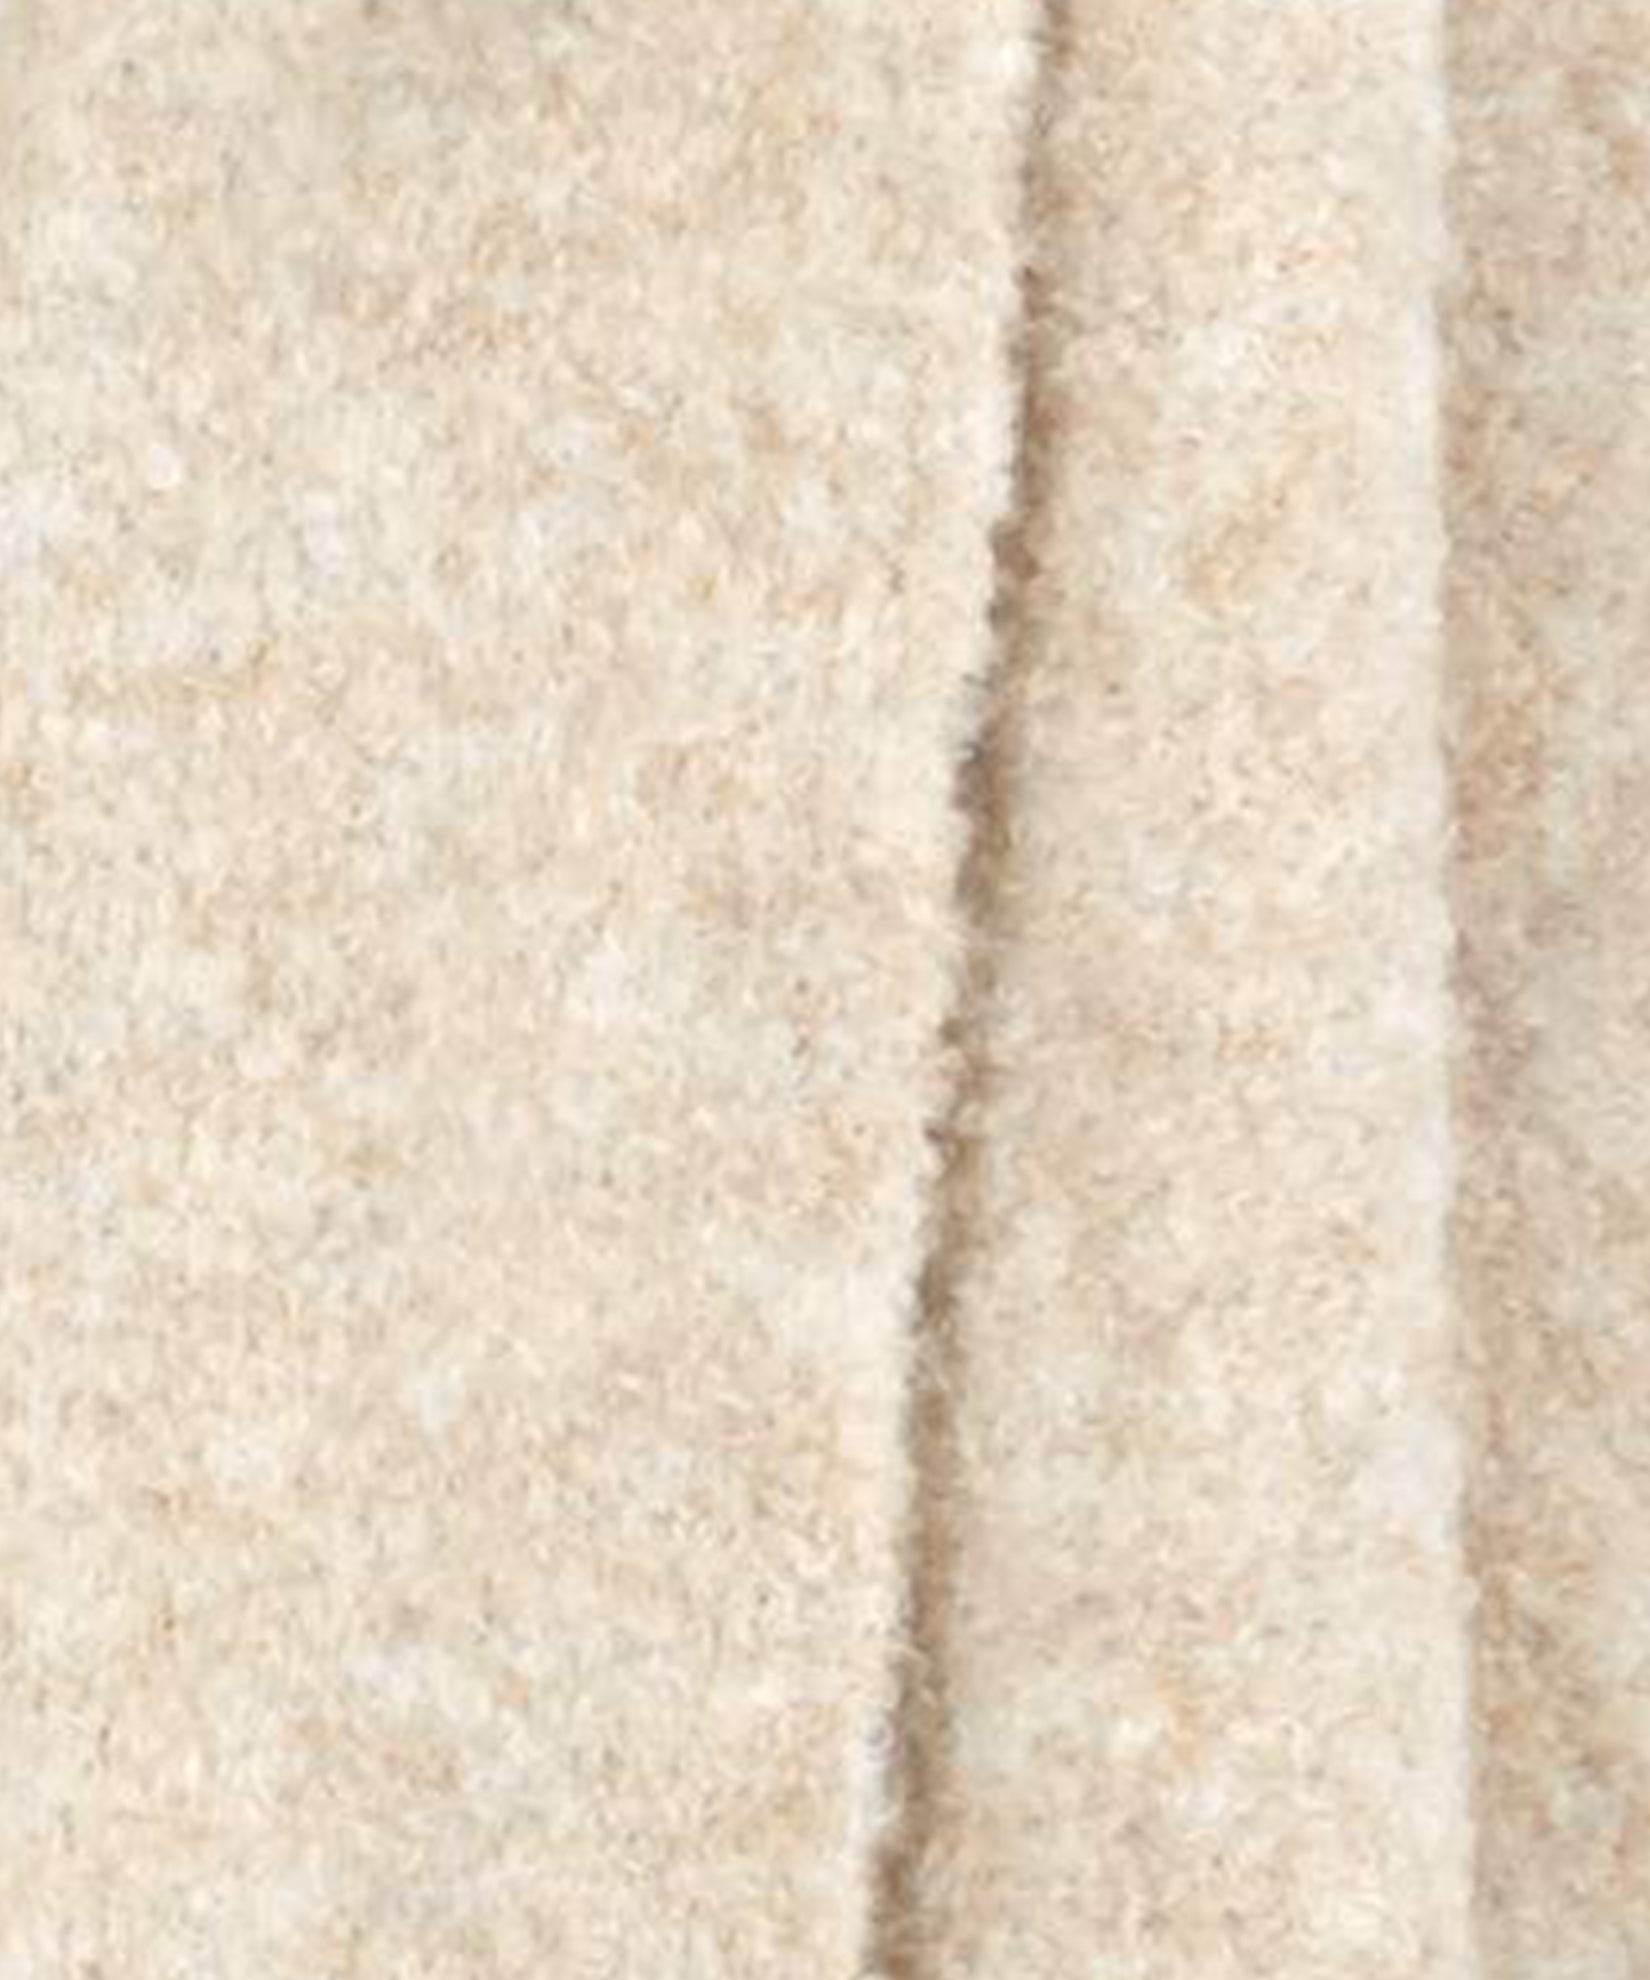 Teddy Boucle Blanket Wrap in color Cream